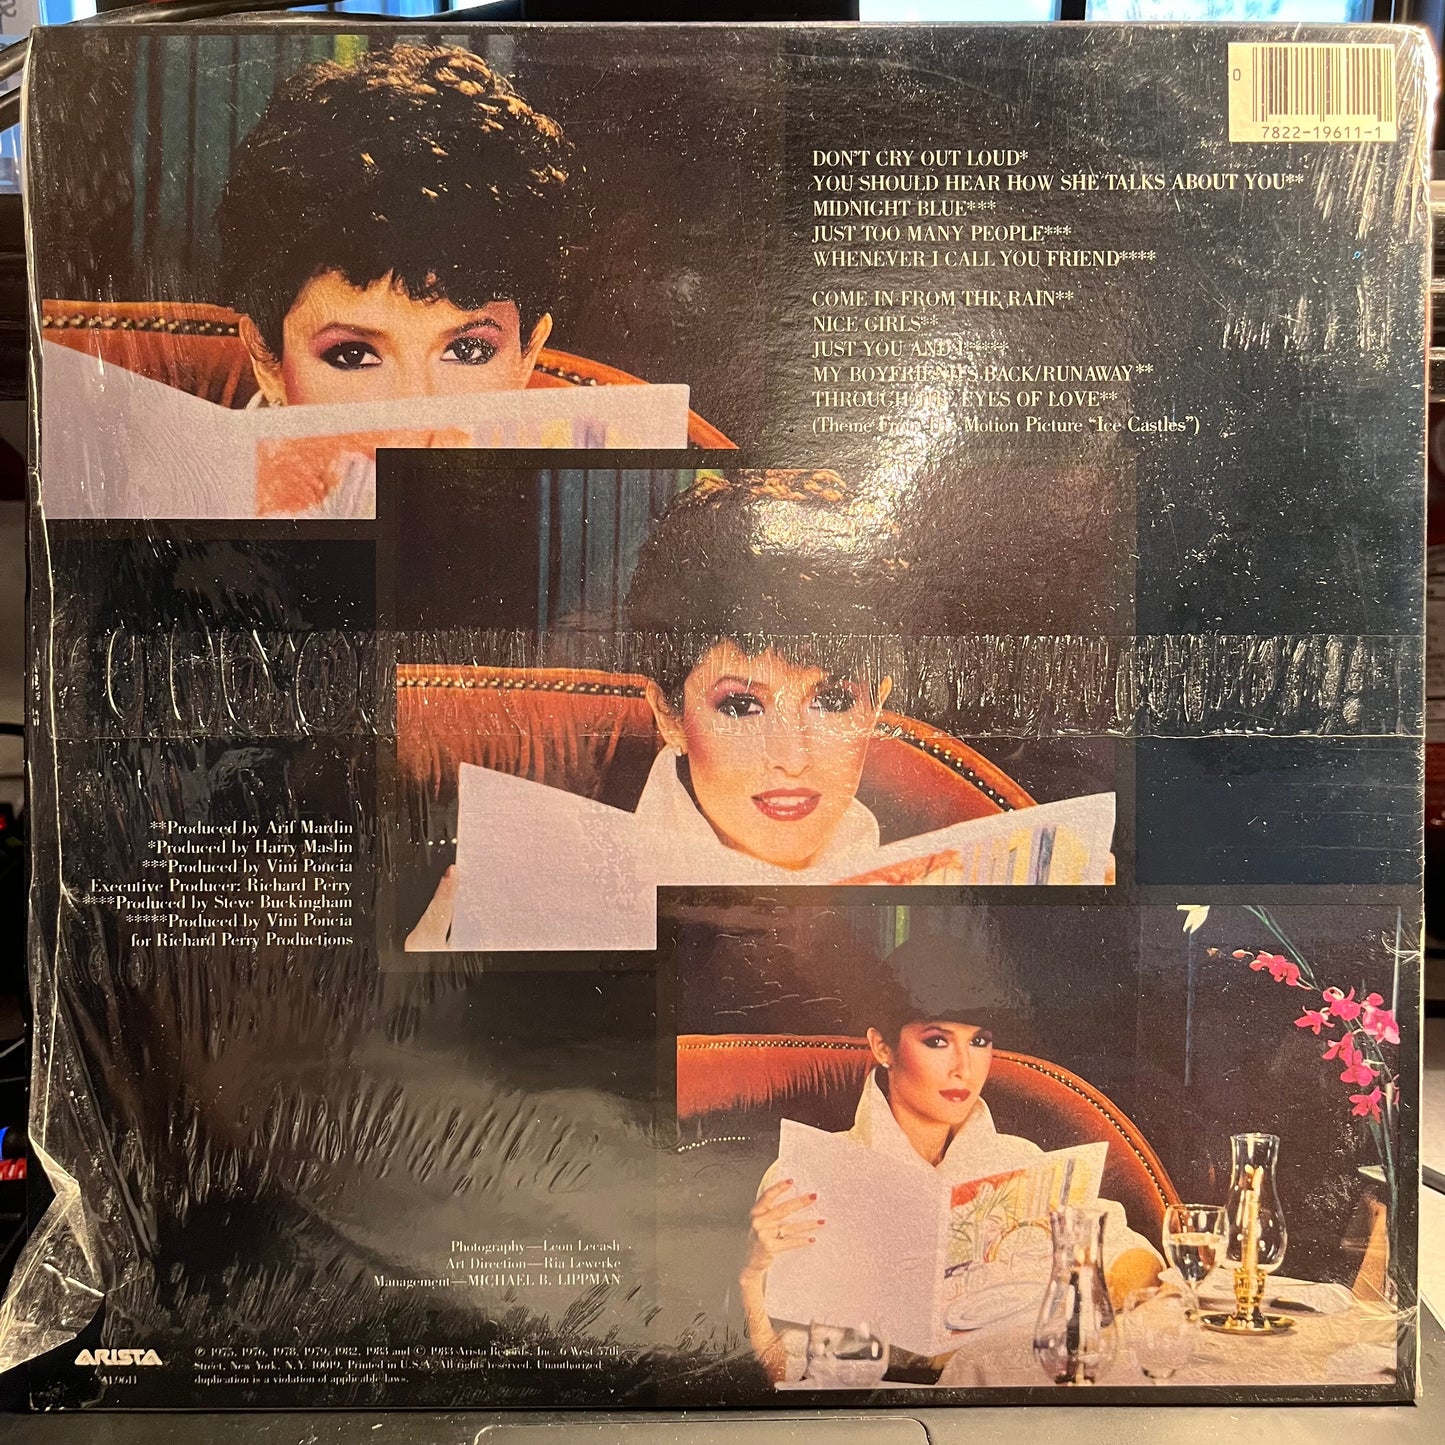 Melissa Manchester Greatest Hits *SHRINK* LP Near Mint (NM or M-) Near Mint (NM or M-)